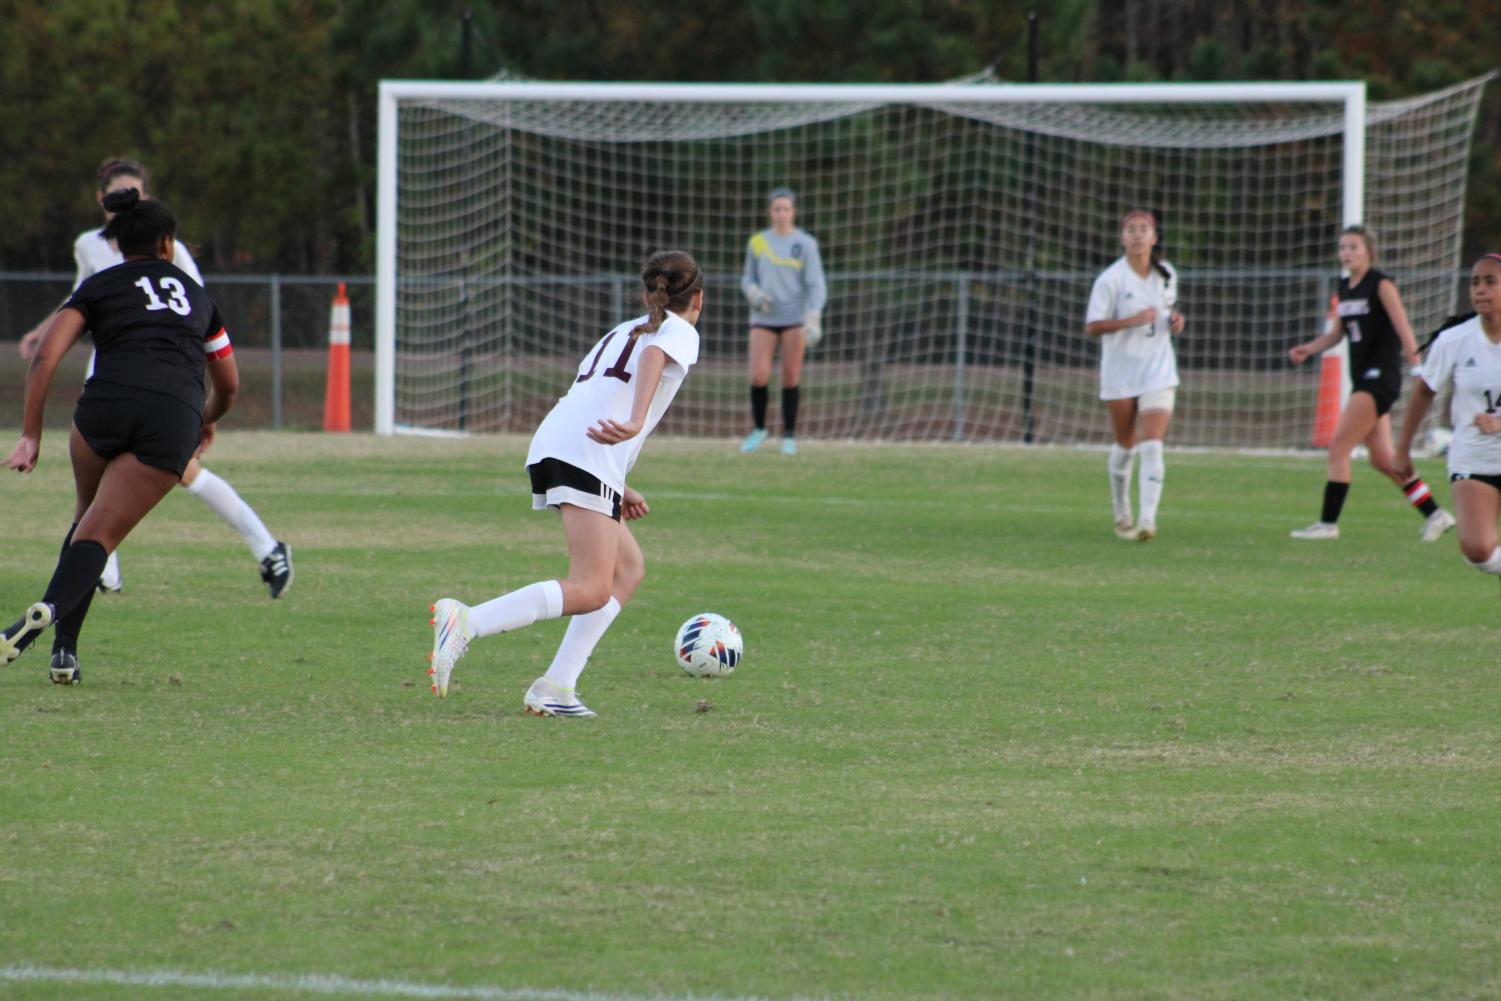 Lady+Mustangs+Soccer+drop+match+to+New+Albany+0-1+%7C+Slideshow